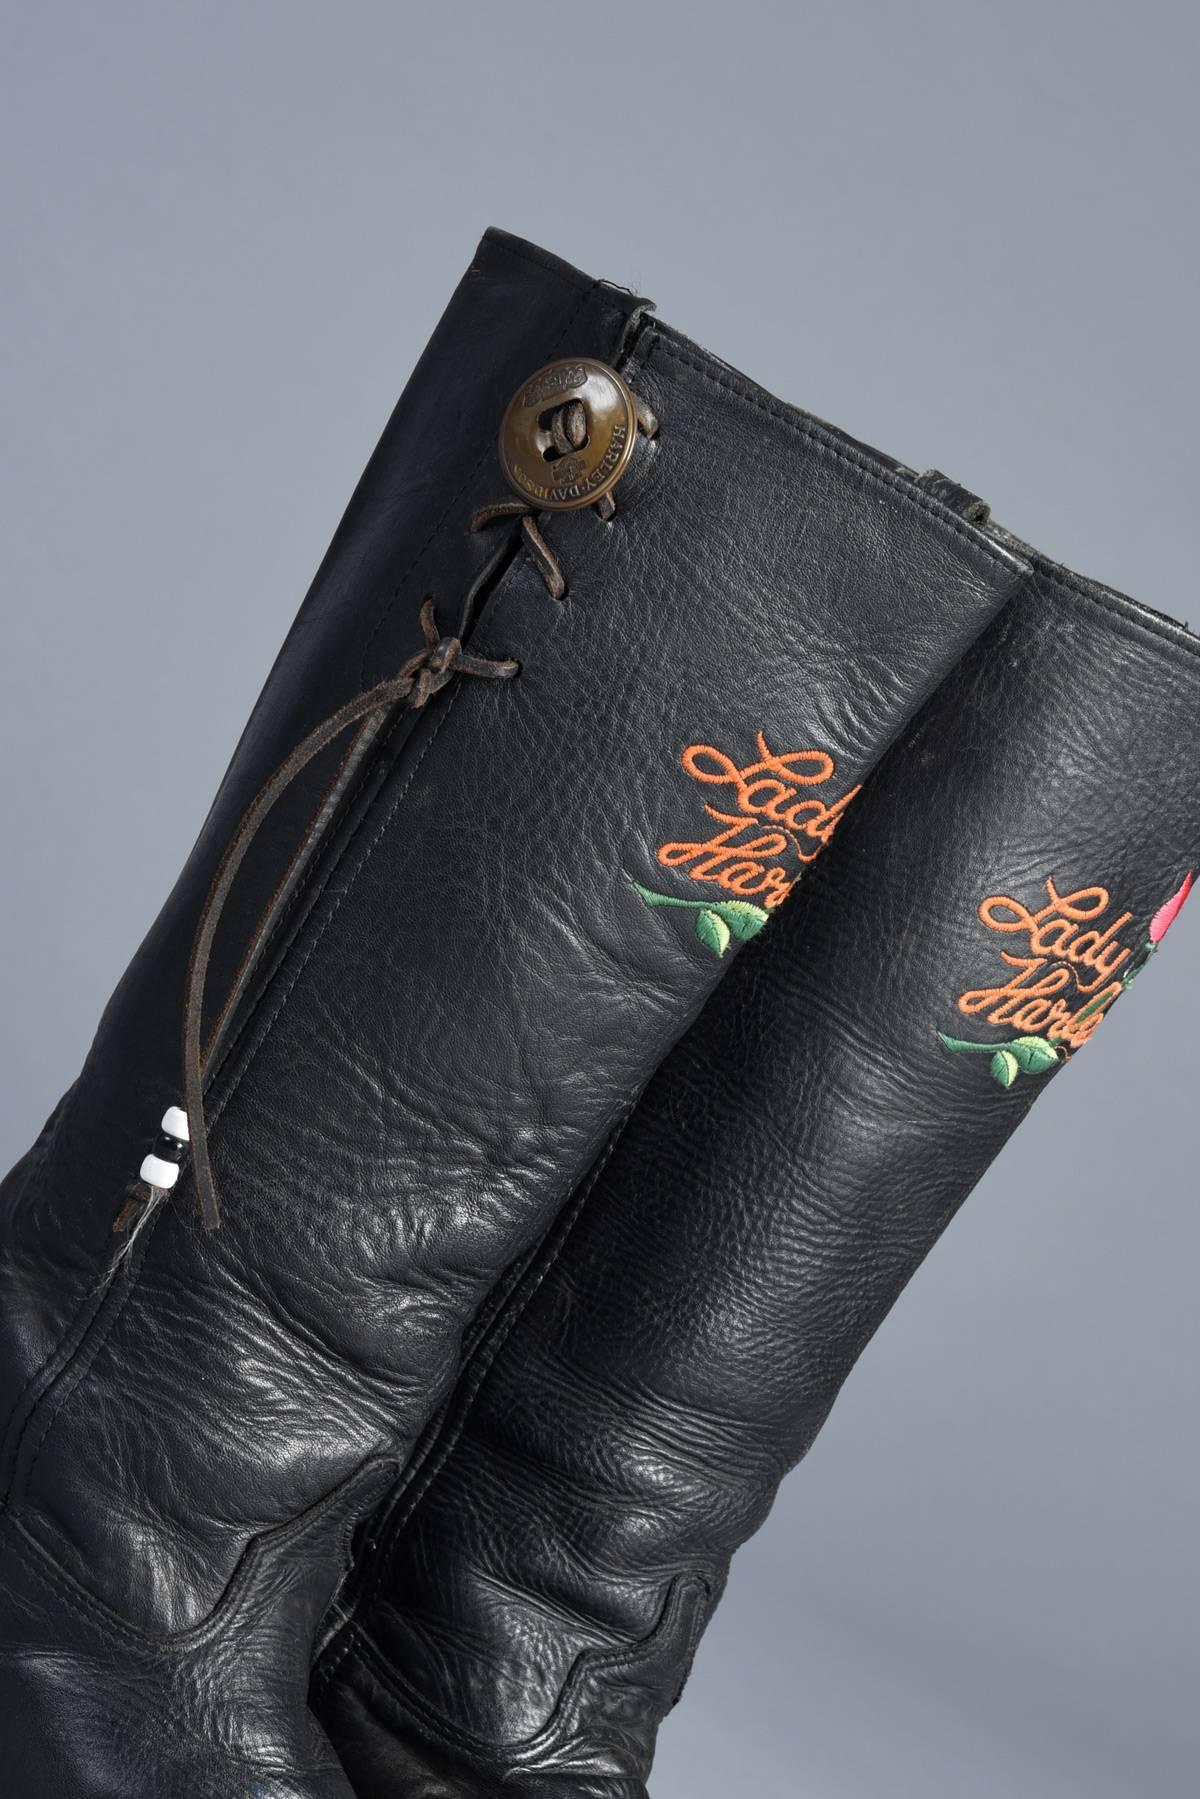 Lady Harley Motorcycle Boots with Embroidered Roses  For Sale 1